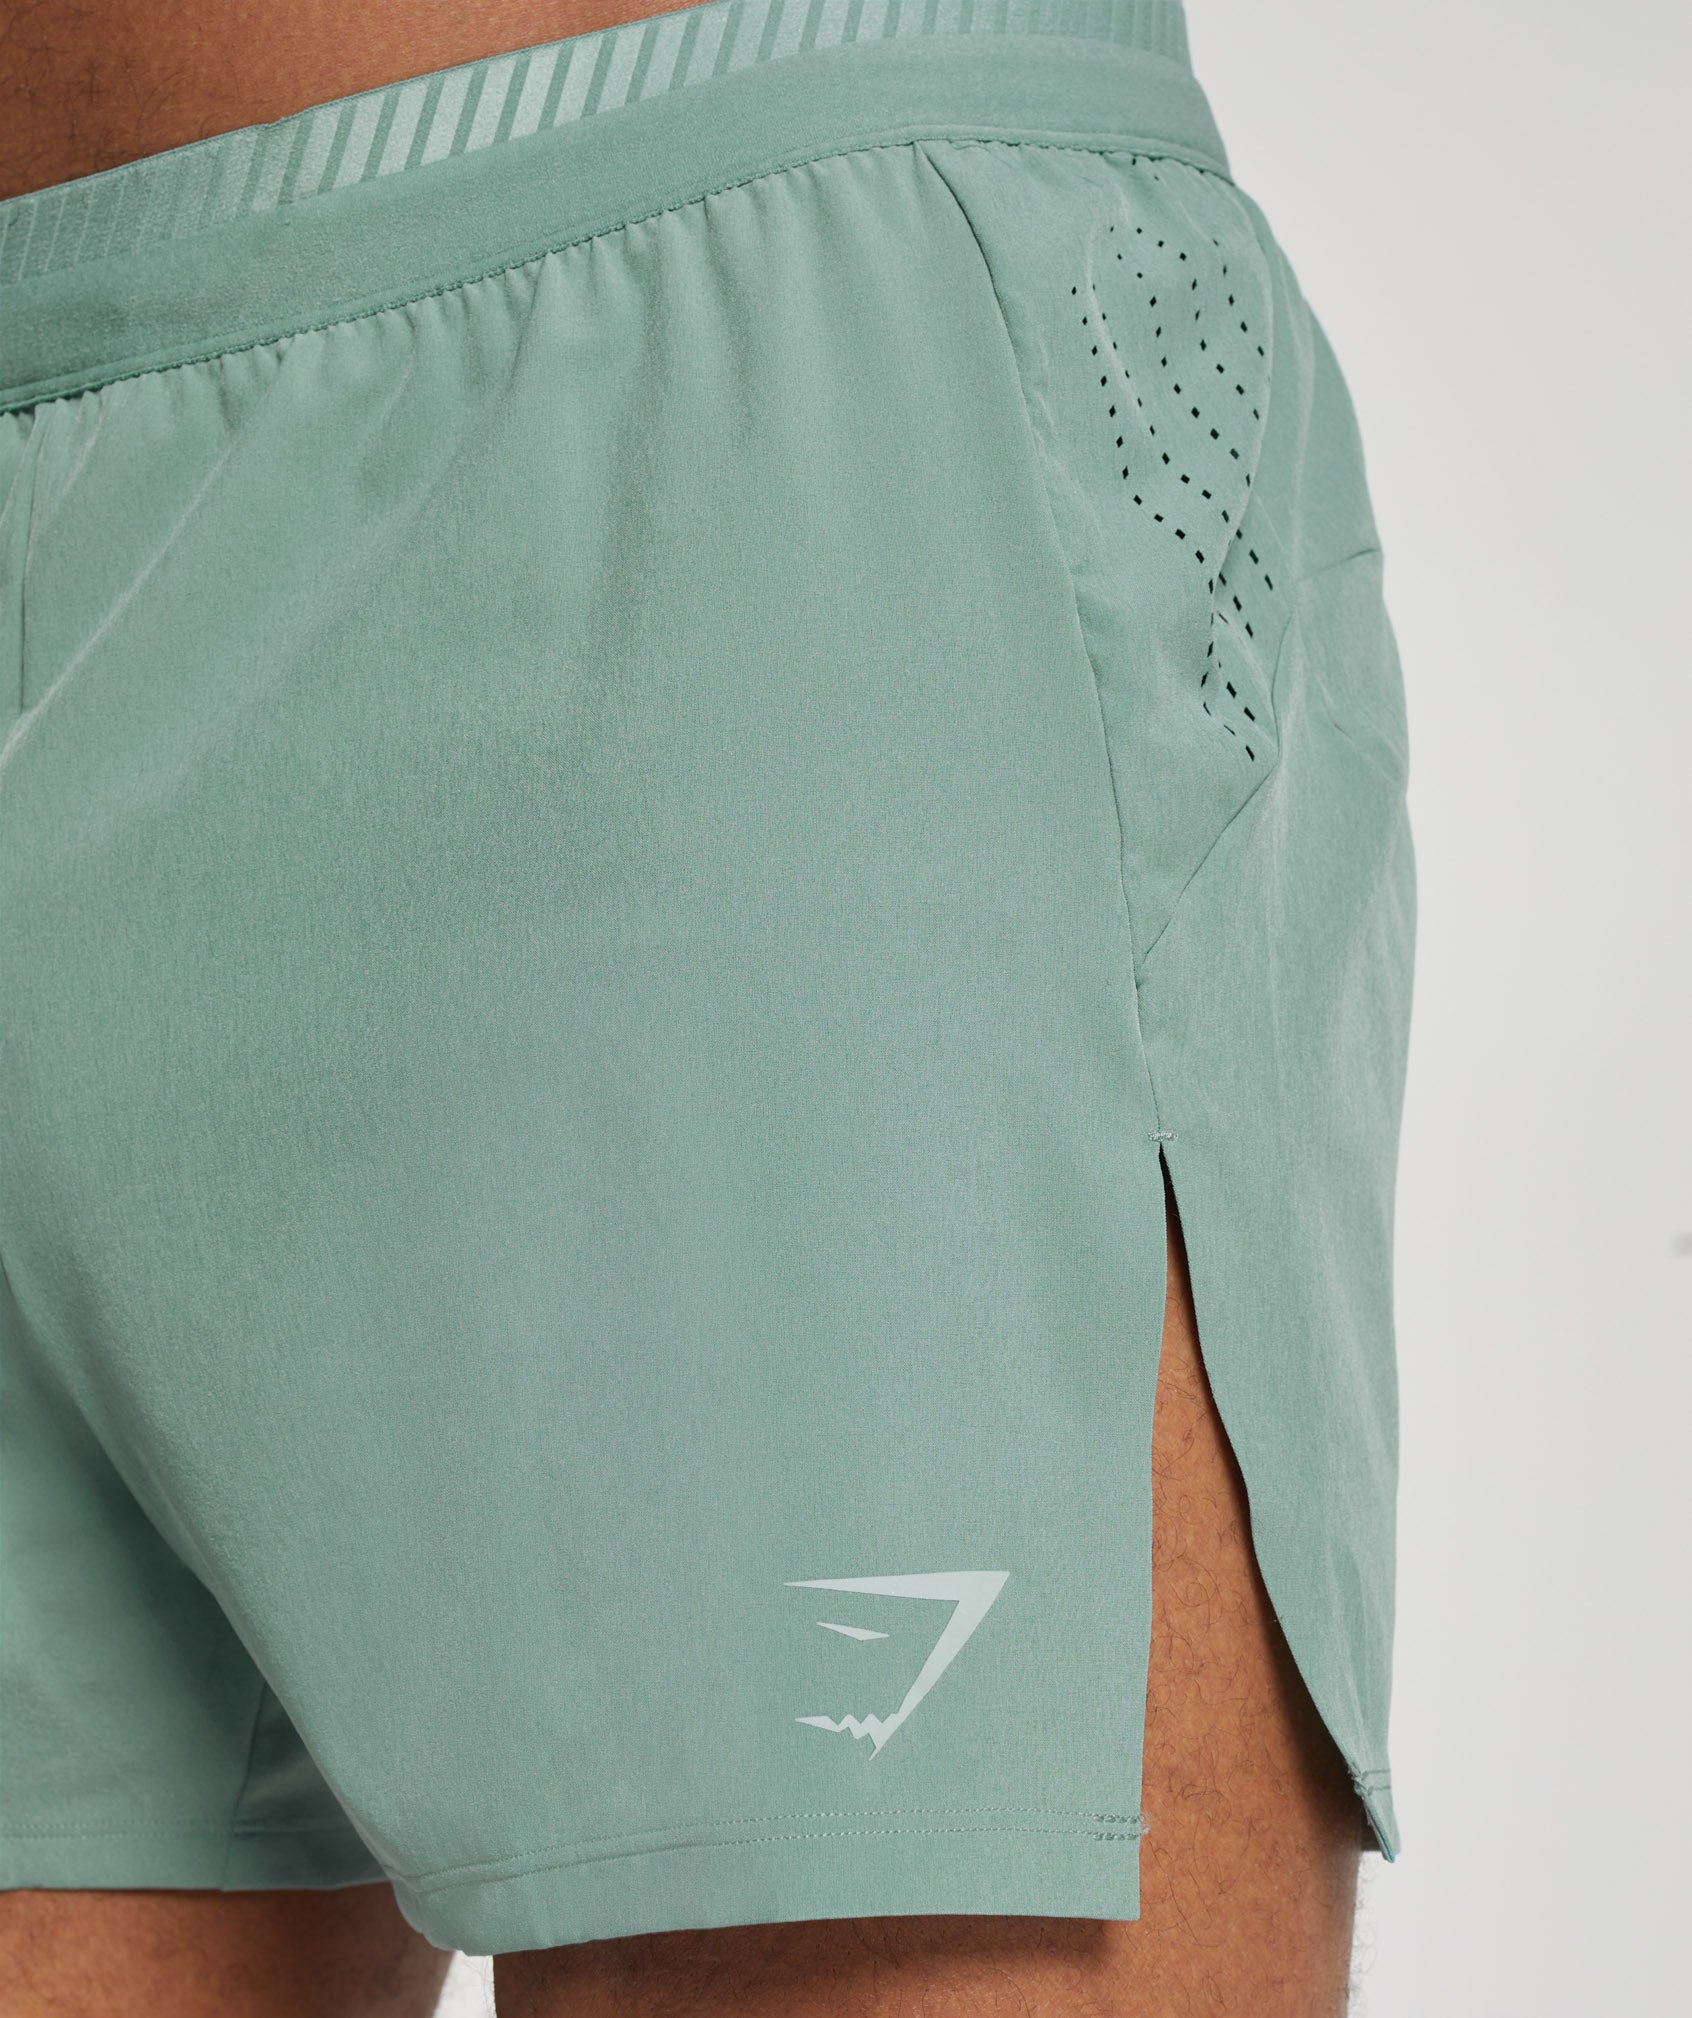 Apex Run 4" Shorts in Ink Teal